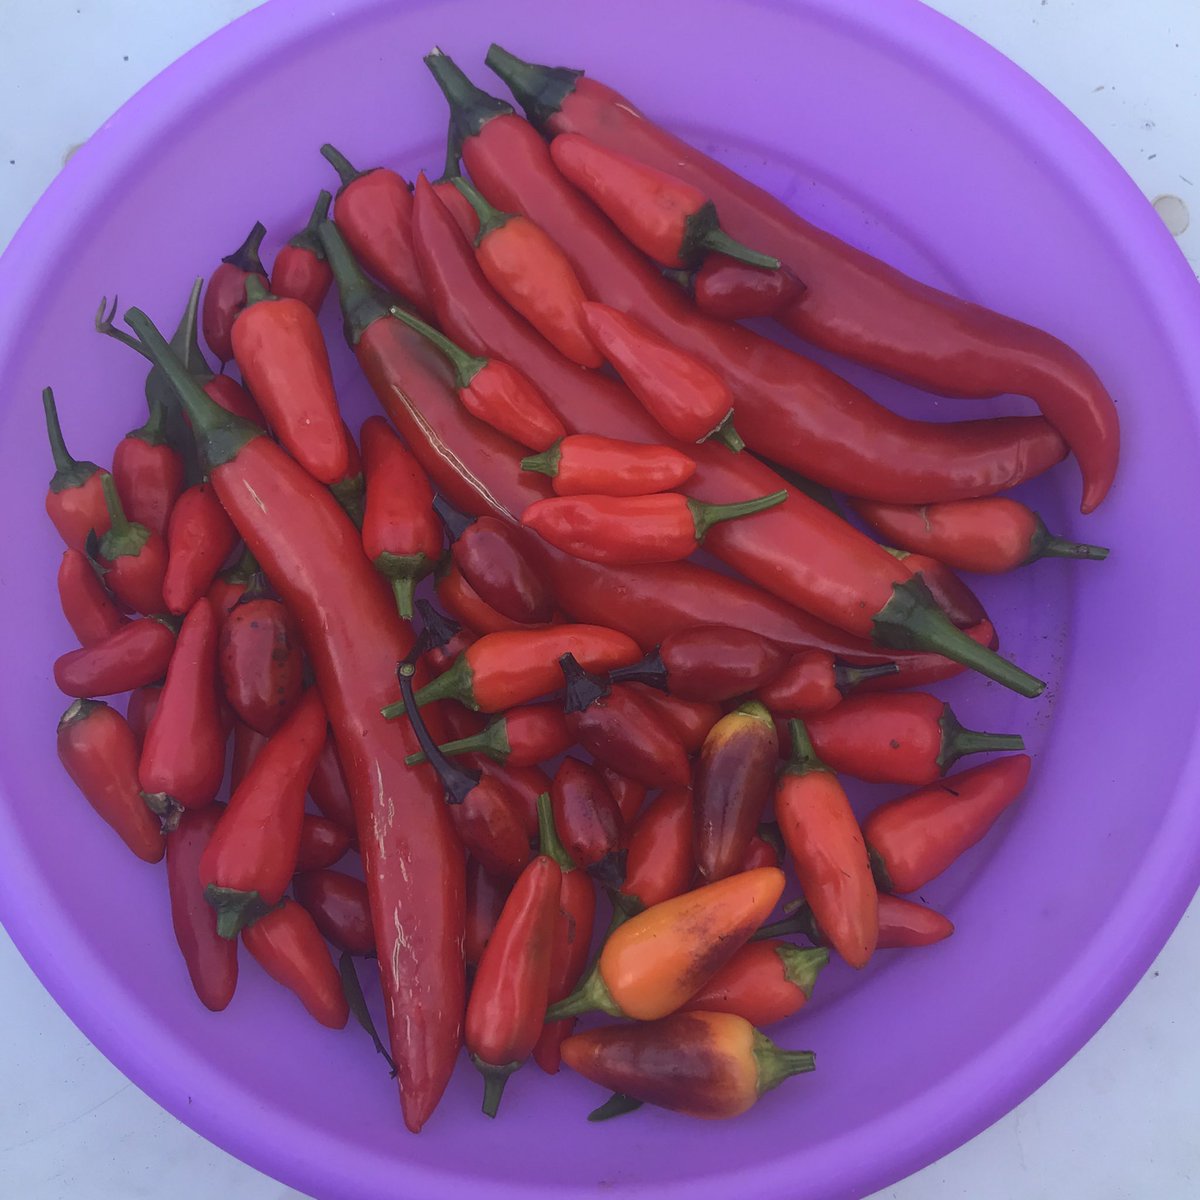 Despite the frost, the chilli harvest continues. 
#BackyardVegies
#Canberra https://t.co/2ISruLbLew